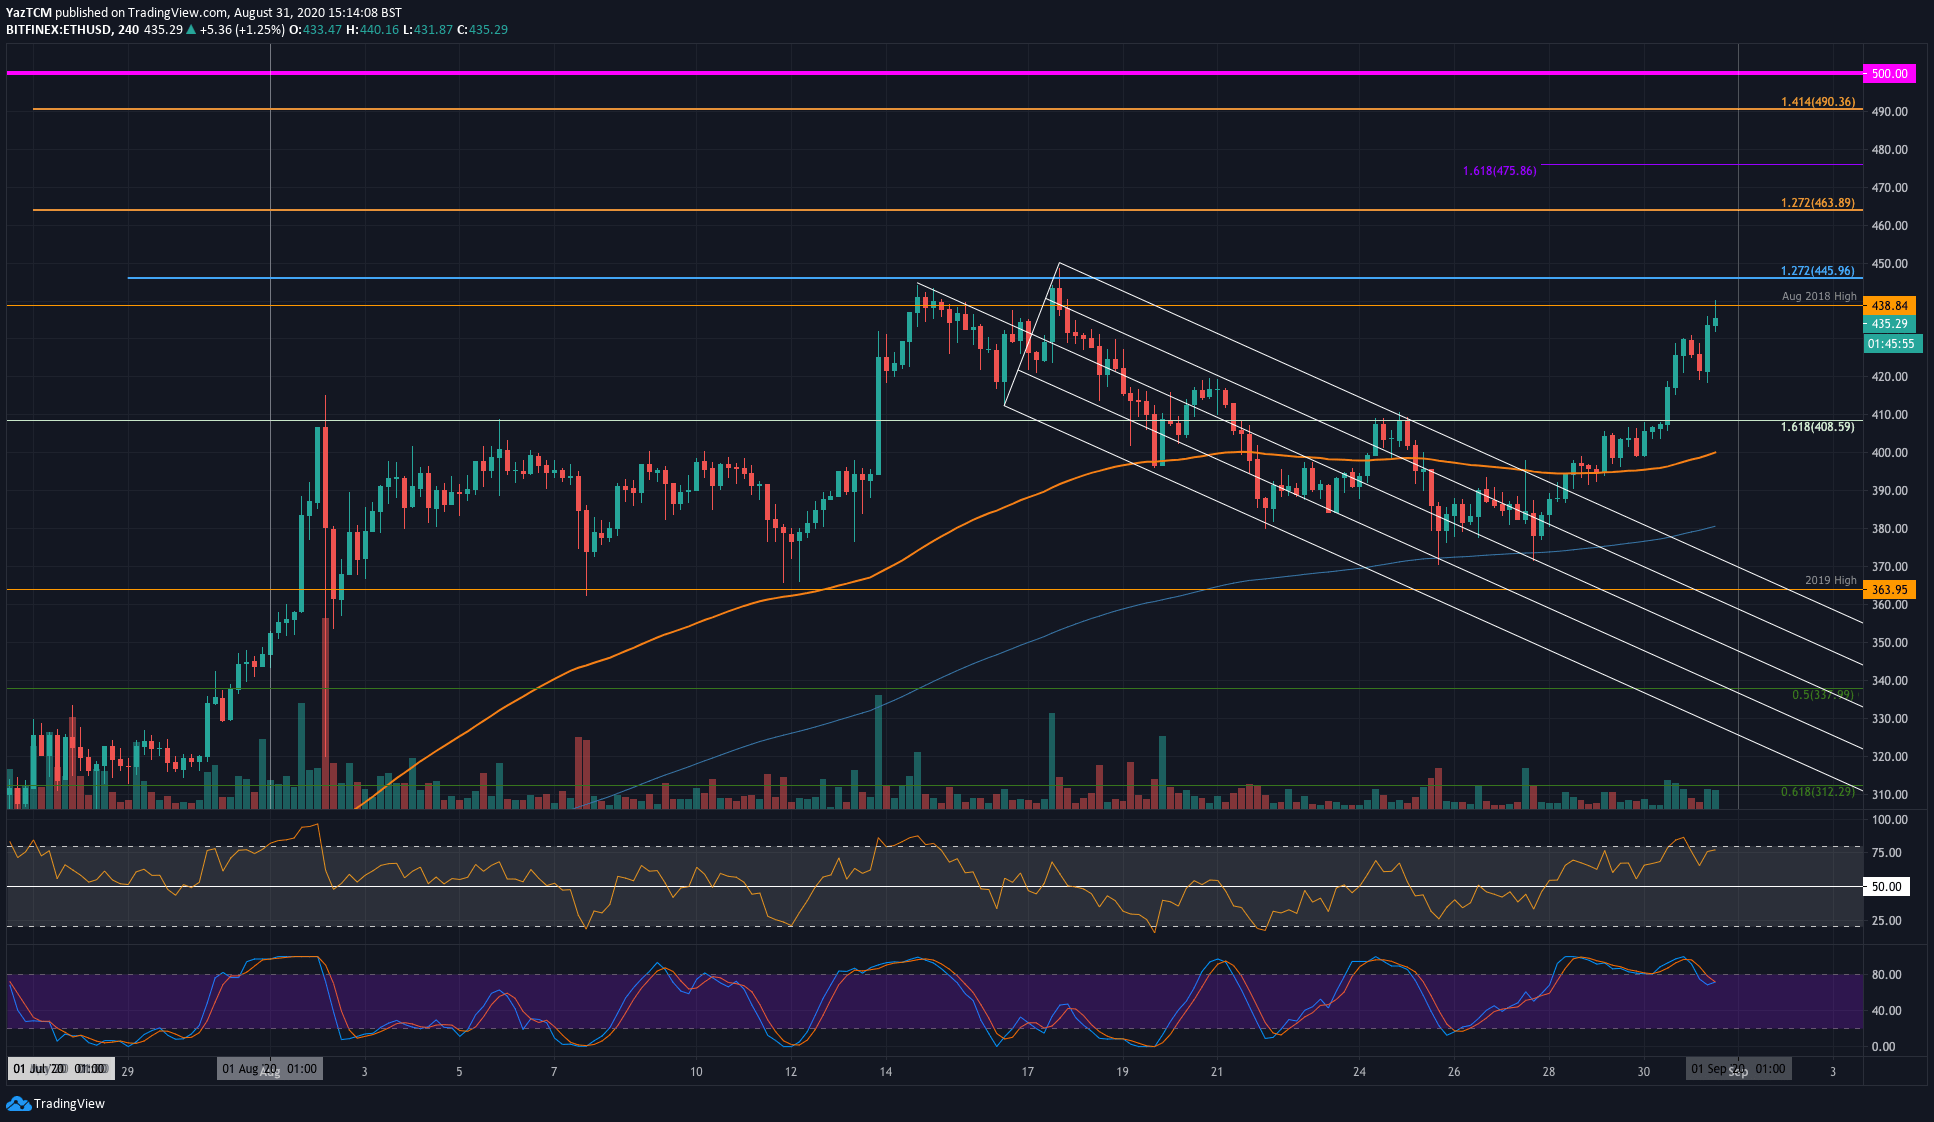 Bulls Resurface As Ethereum Touches $440, What’s Next? (ETH Price Analysis)